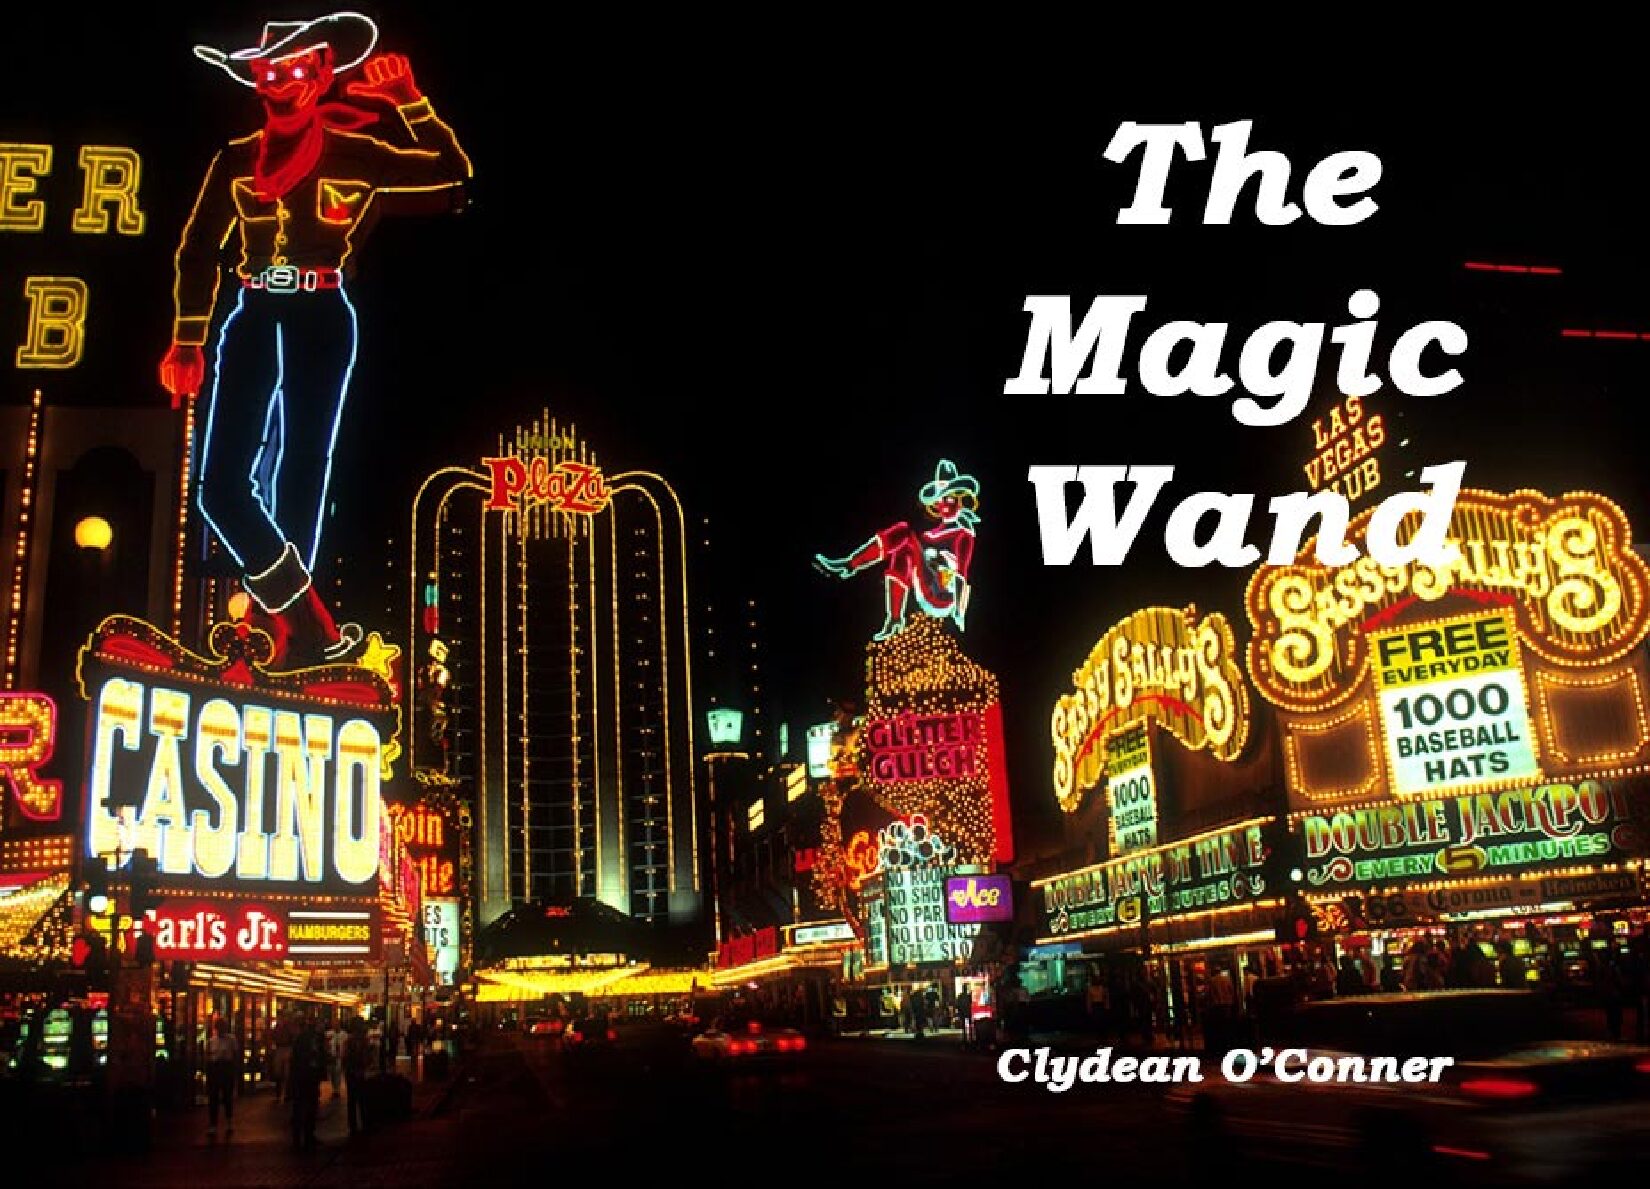 The Magic Wand Kindle Edition is Free through September 5